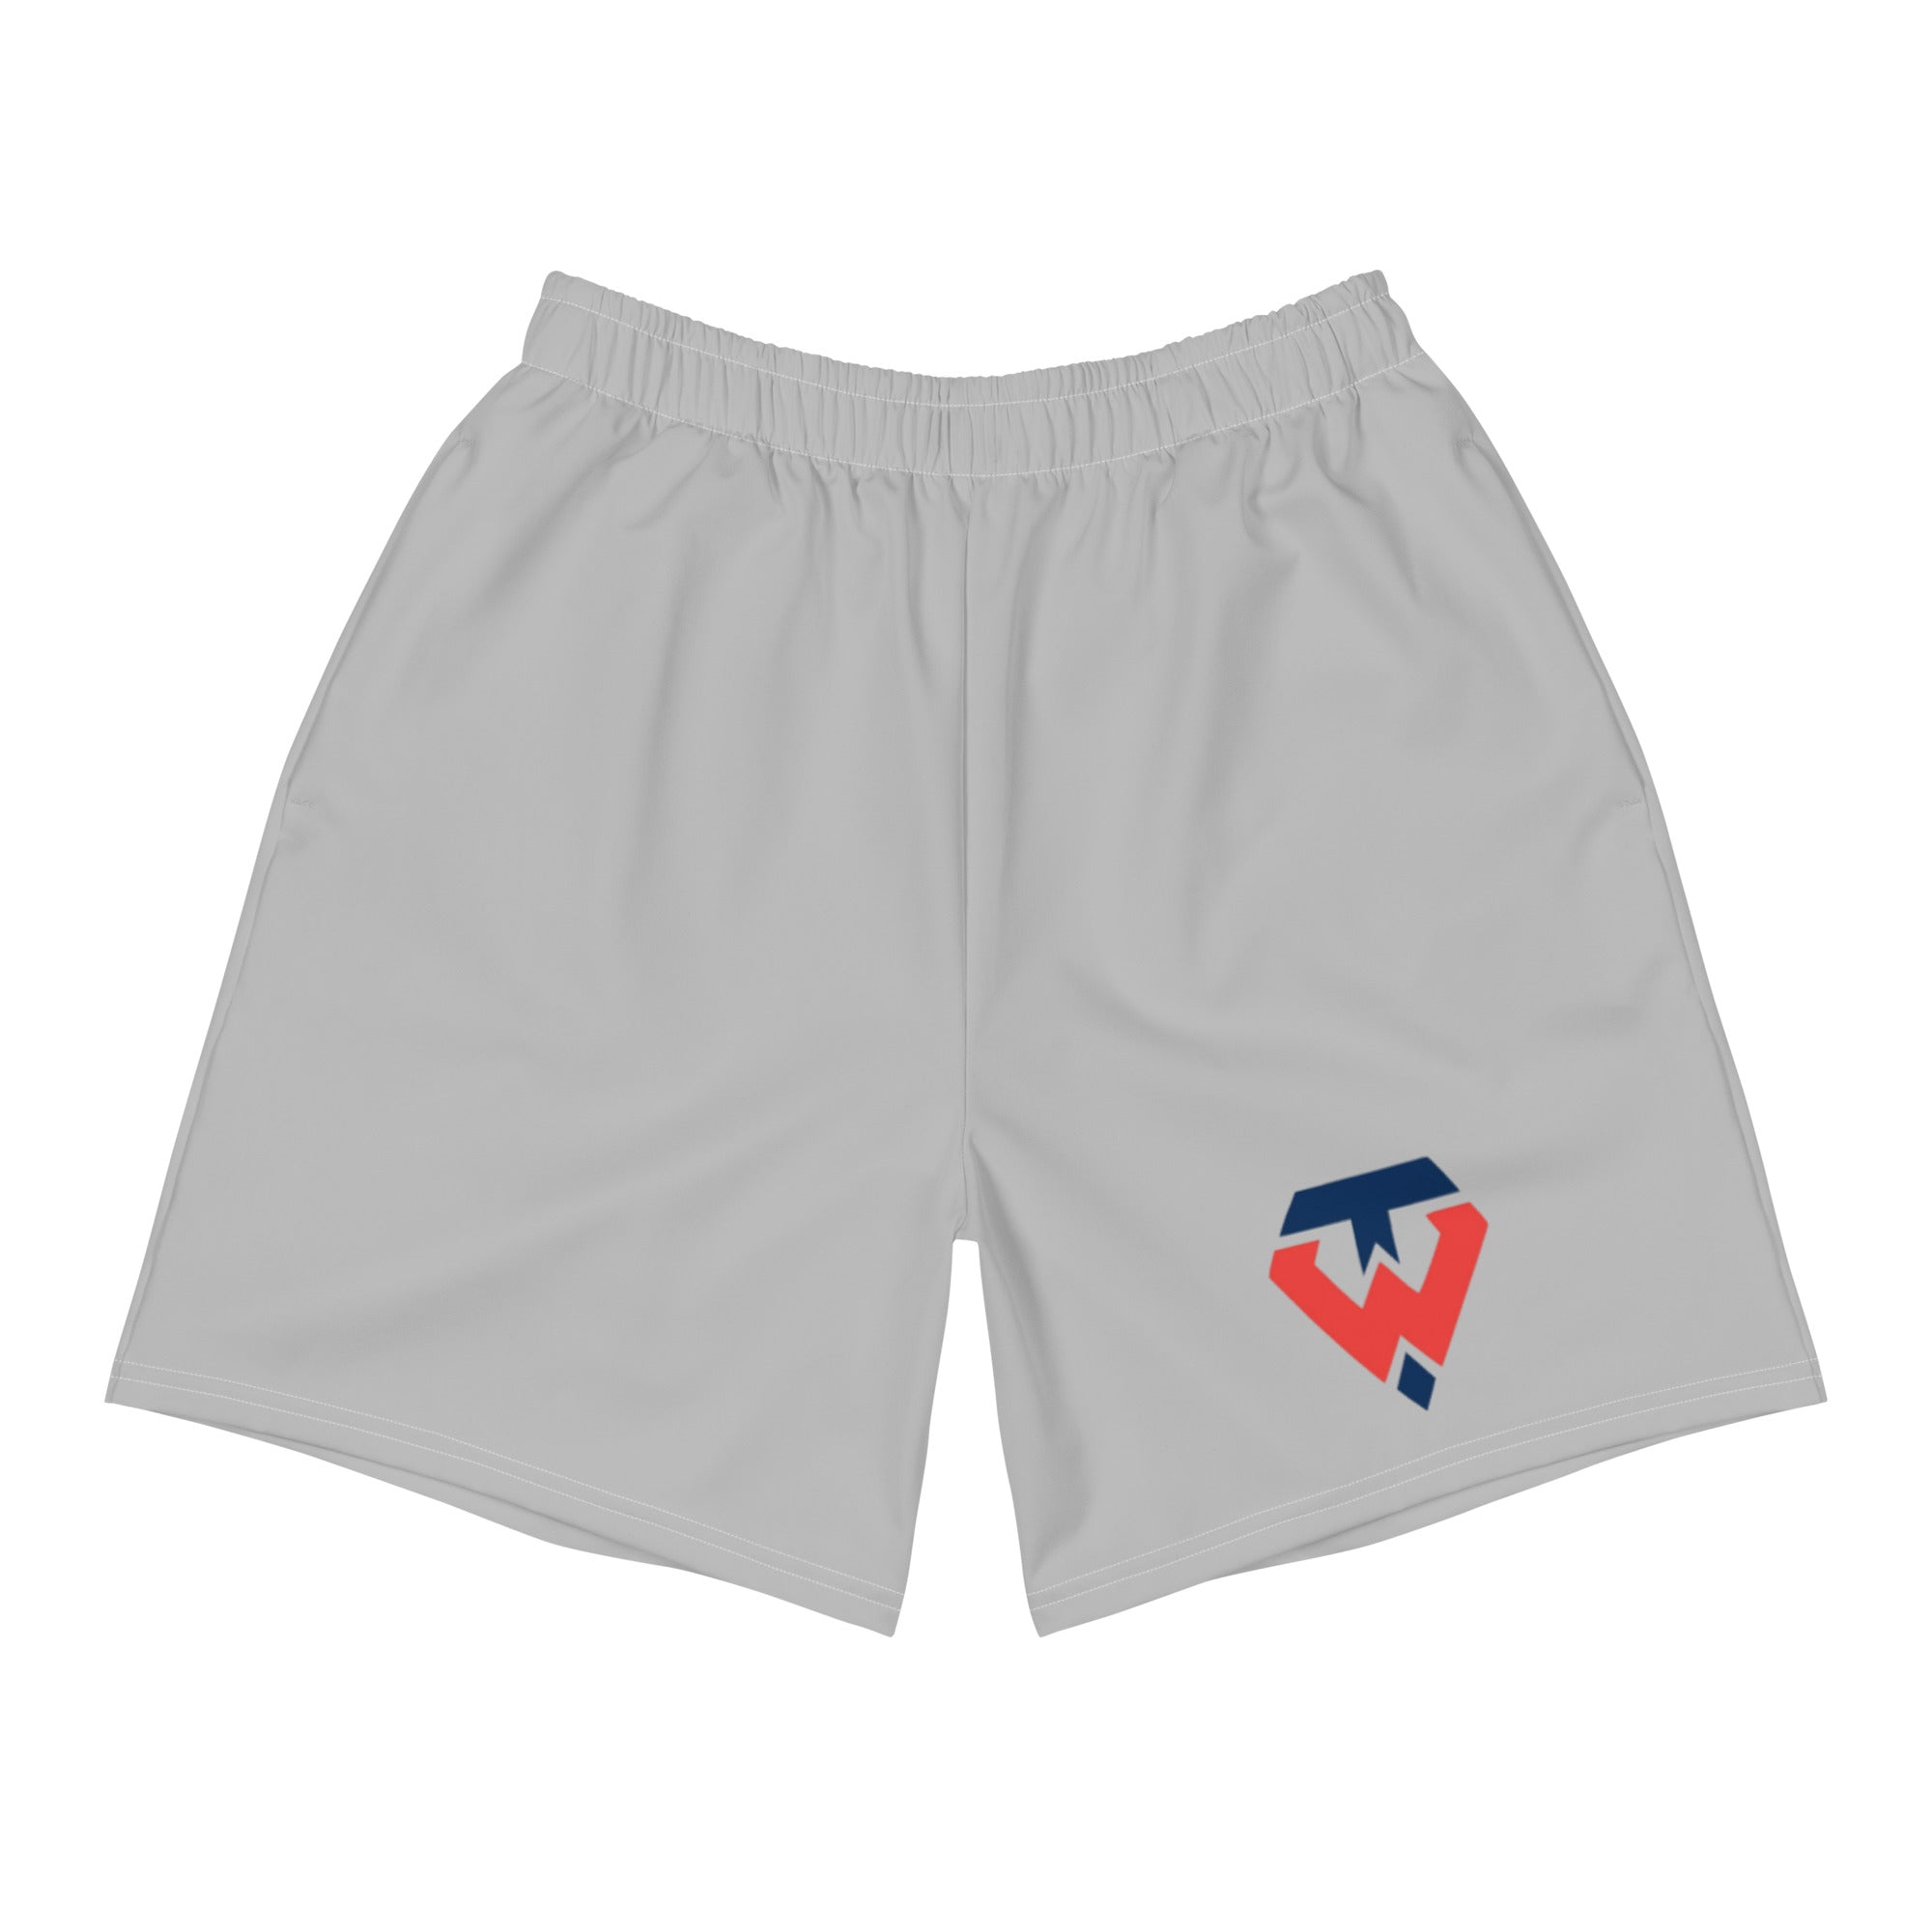 Tampa Warriors TW Seal Gray Men's Athletic Shorts